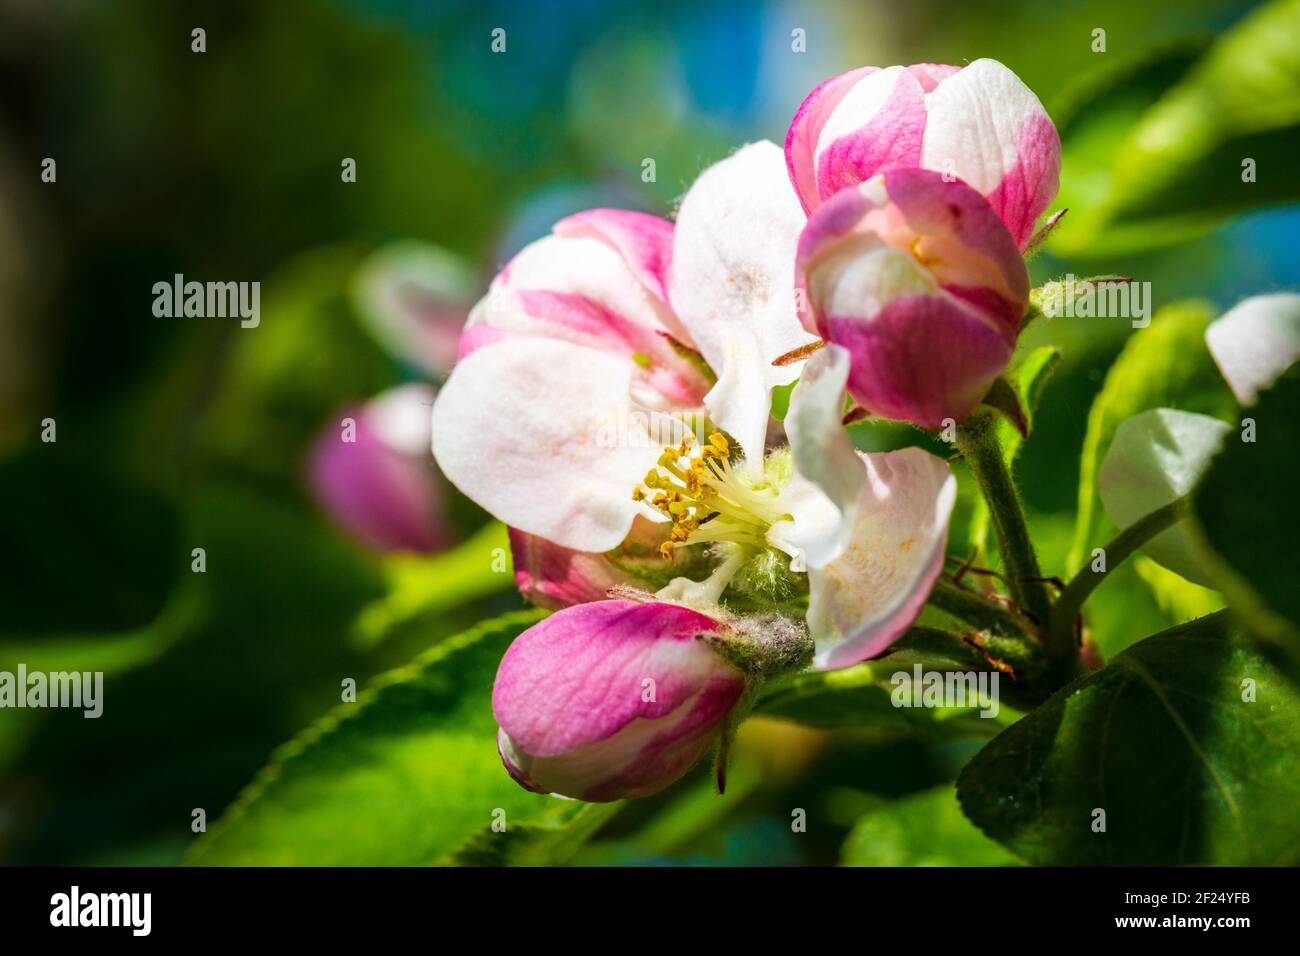 A close-up of a Crabbe Apple blossom flower and stamens in spring Stock Photo